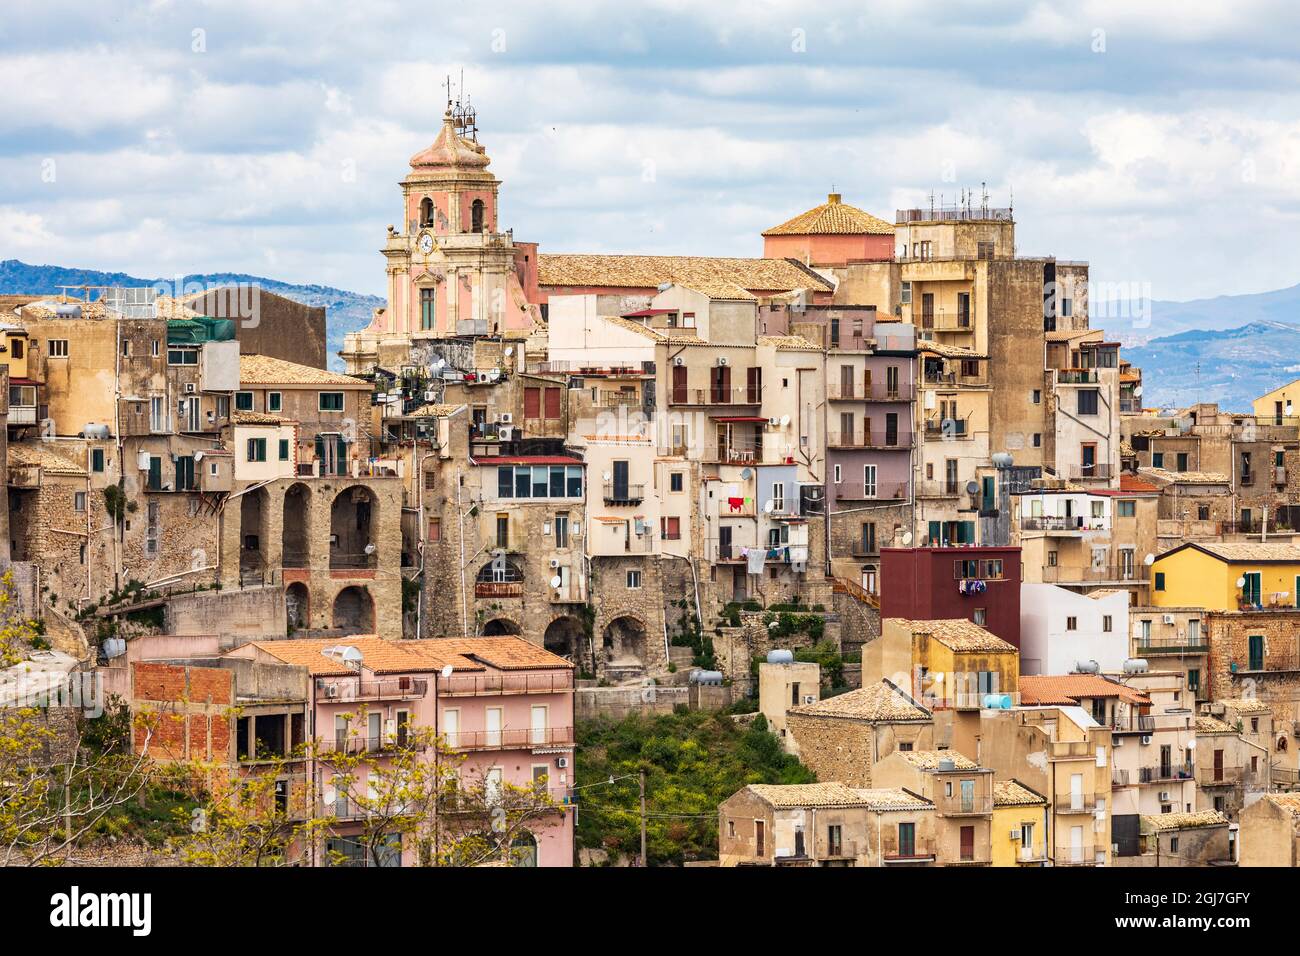 Italy, Sicily, Enna Province, Centuripe. The ancient hill town of Centuripe in eastern Sicily. The town is pre-Roman, dating back to the 5th century B Stock Photo